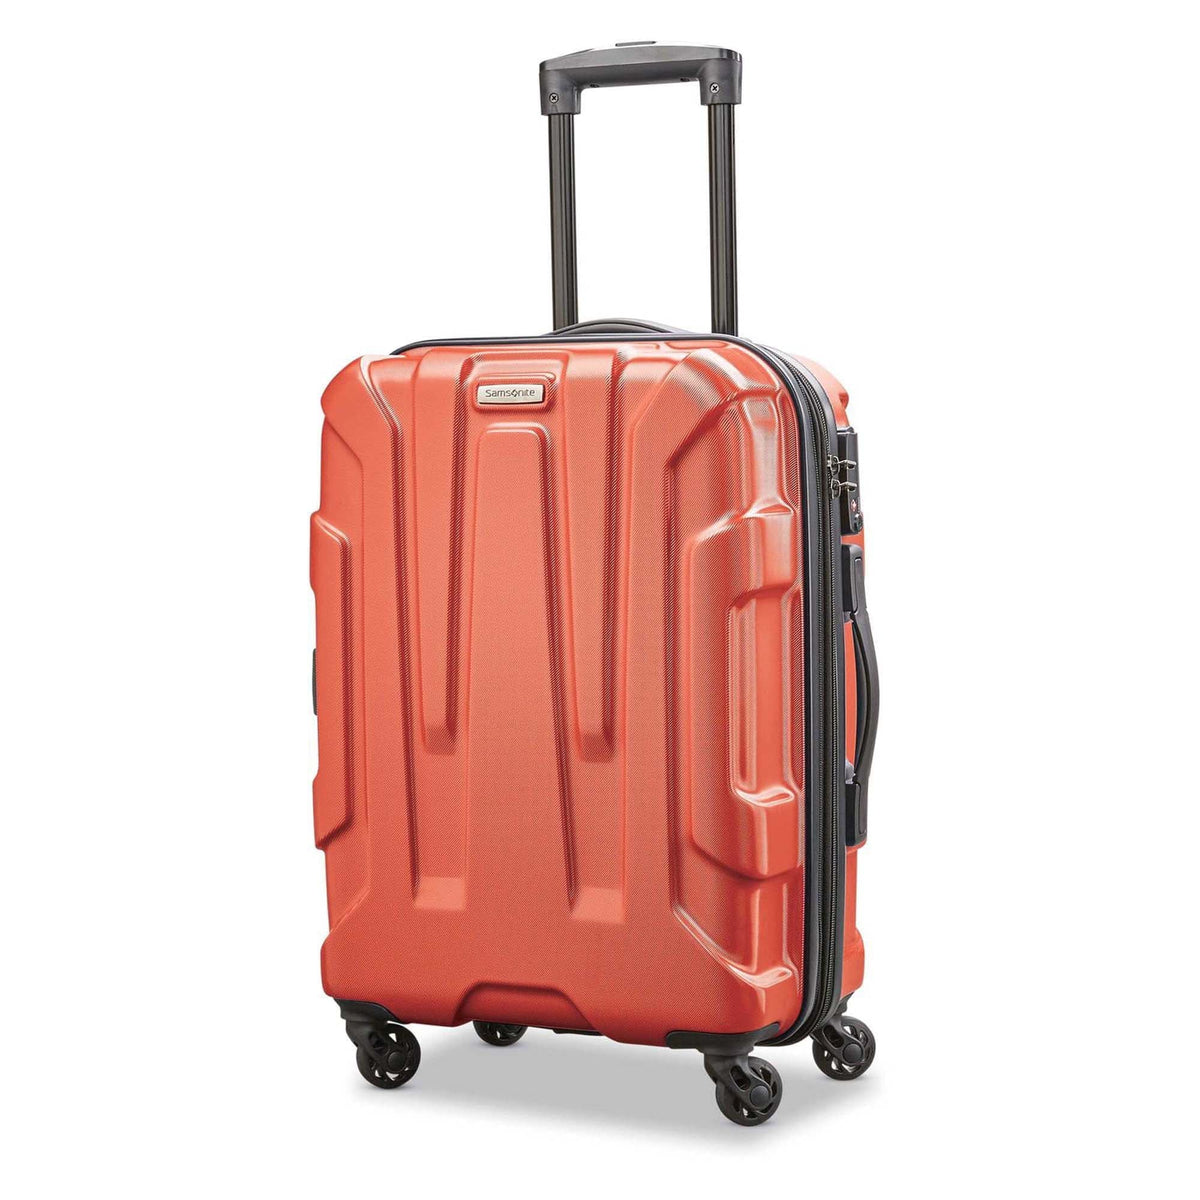 Samsonite Centric 20" Carry-On Spinner Luggage